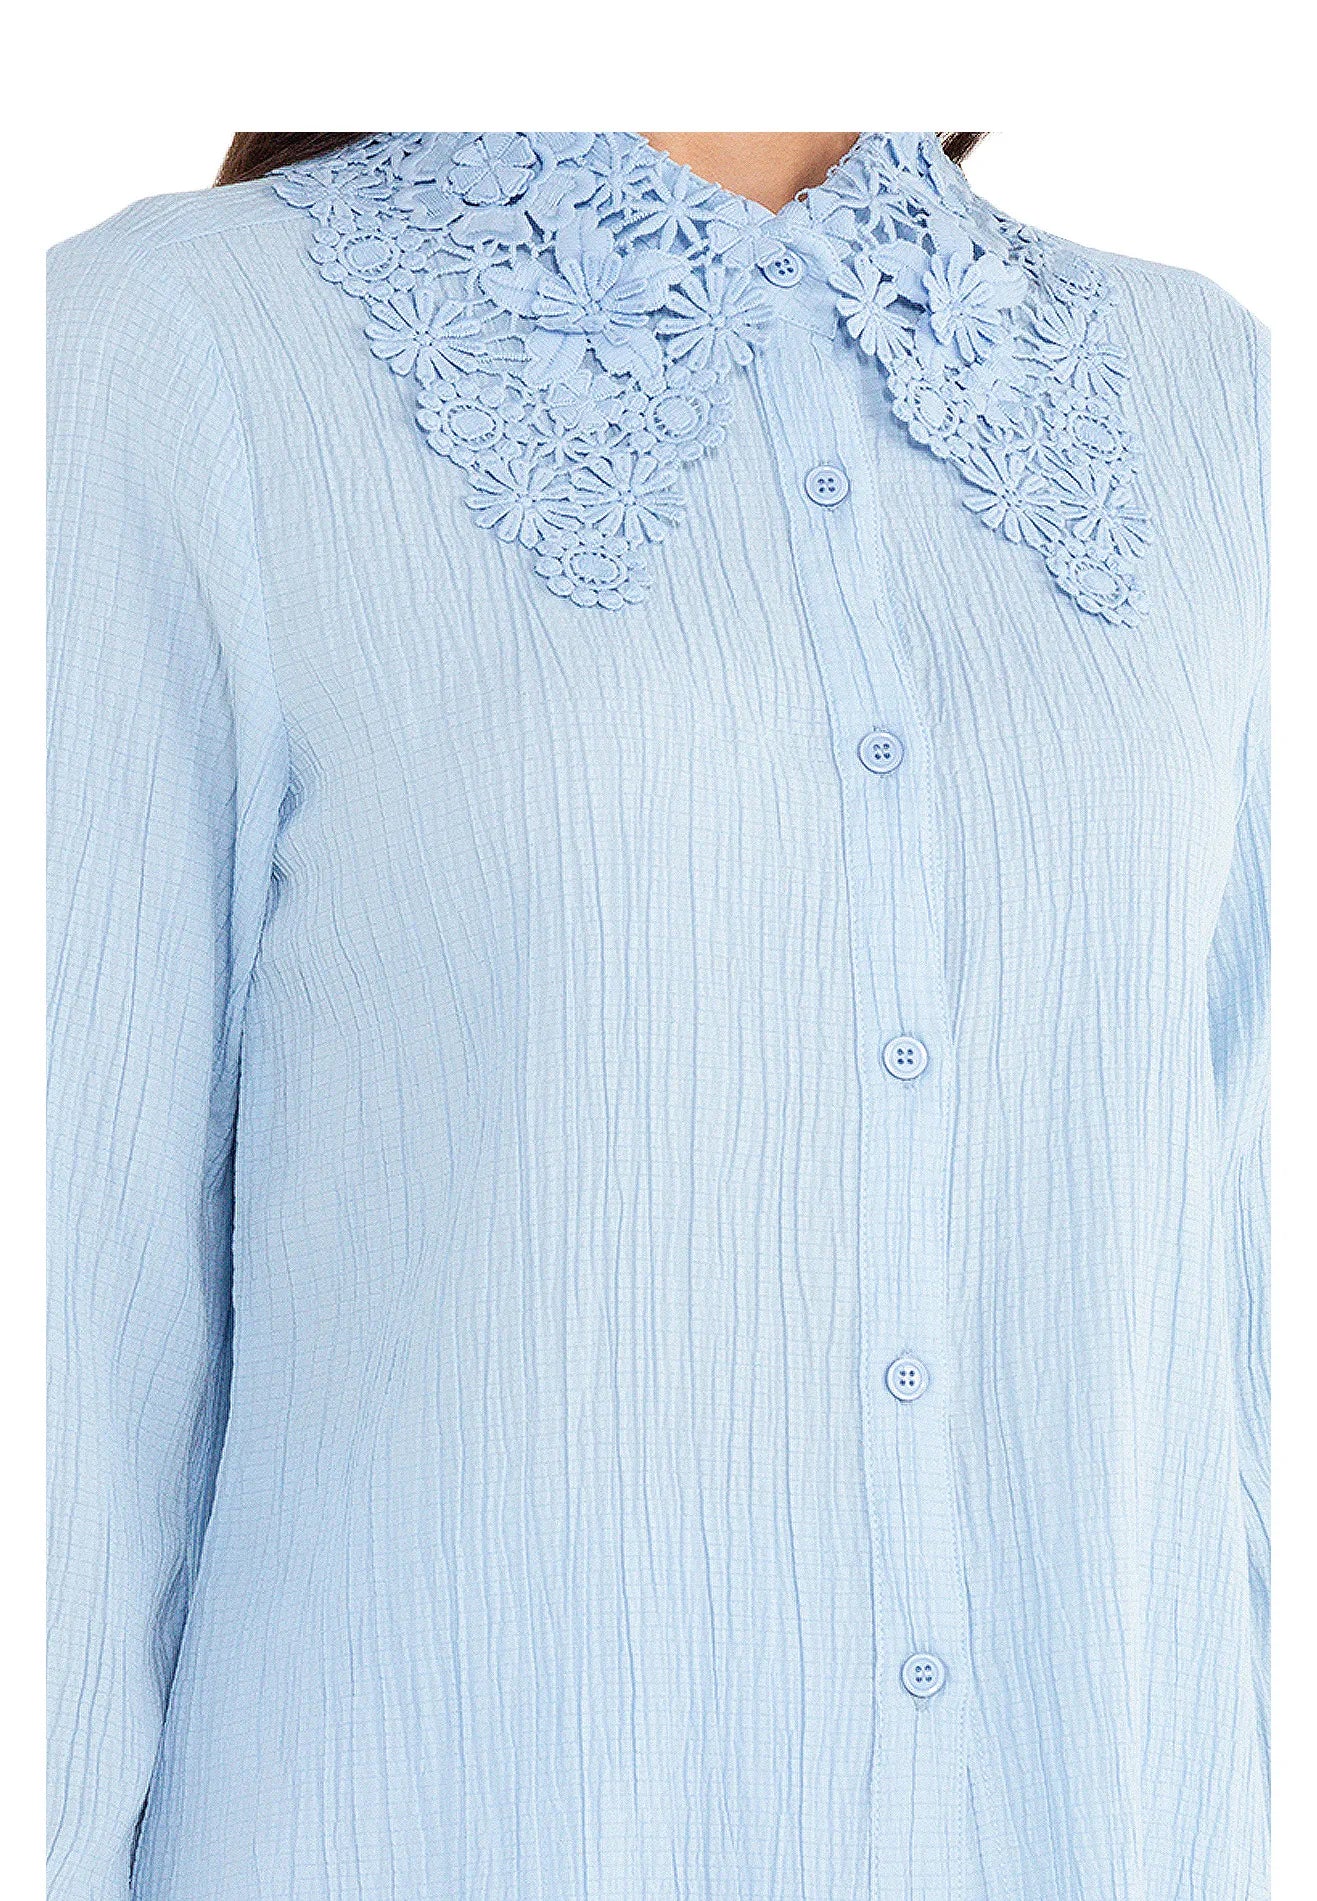 ELLE Apparel Floral Collar Embroidered Button Up Blouse